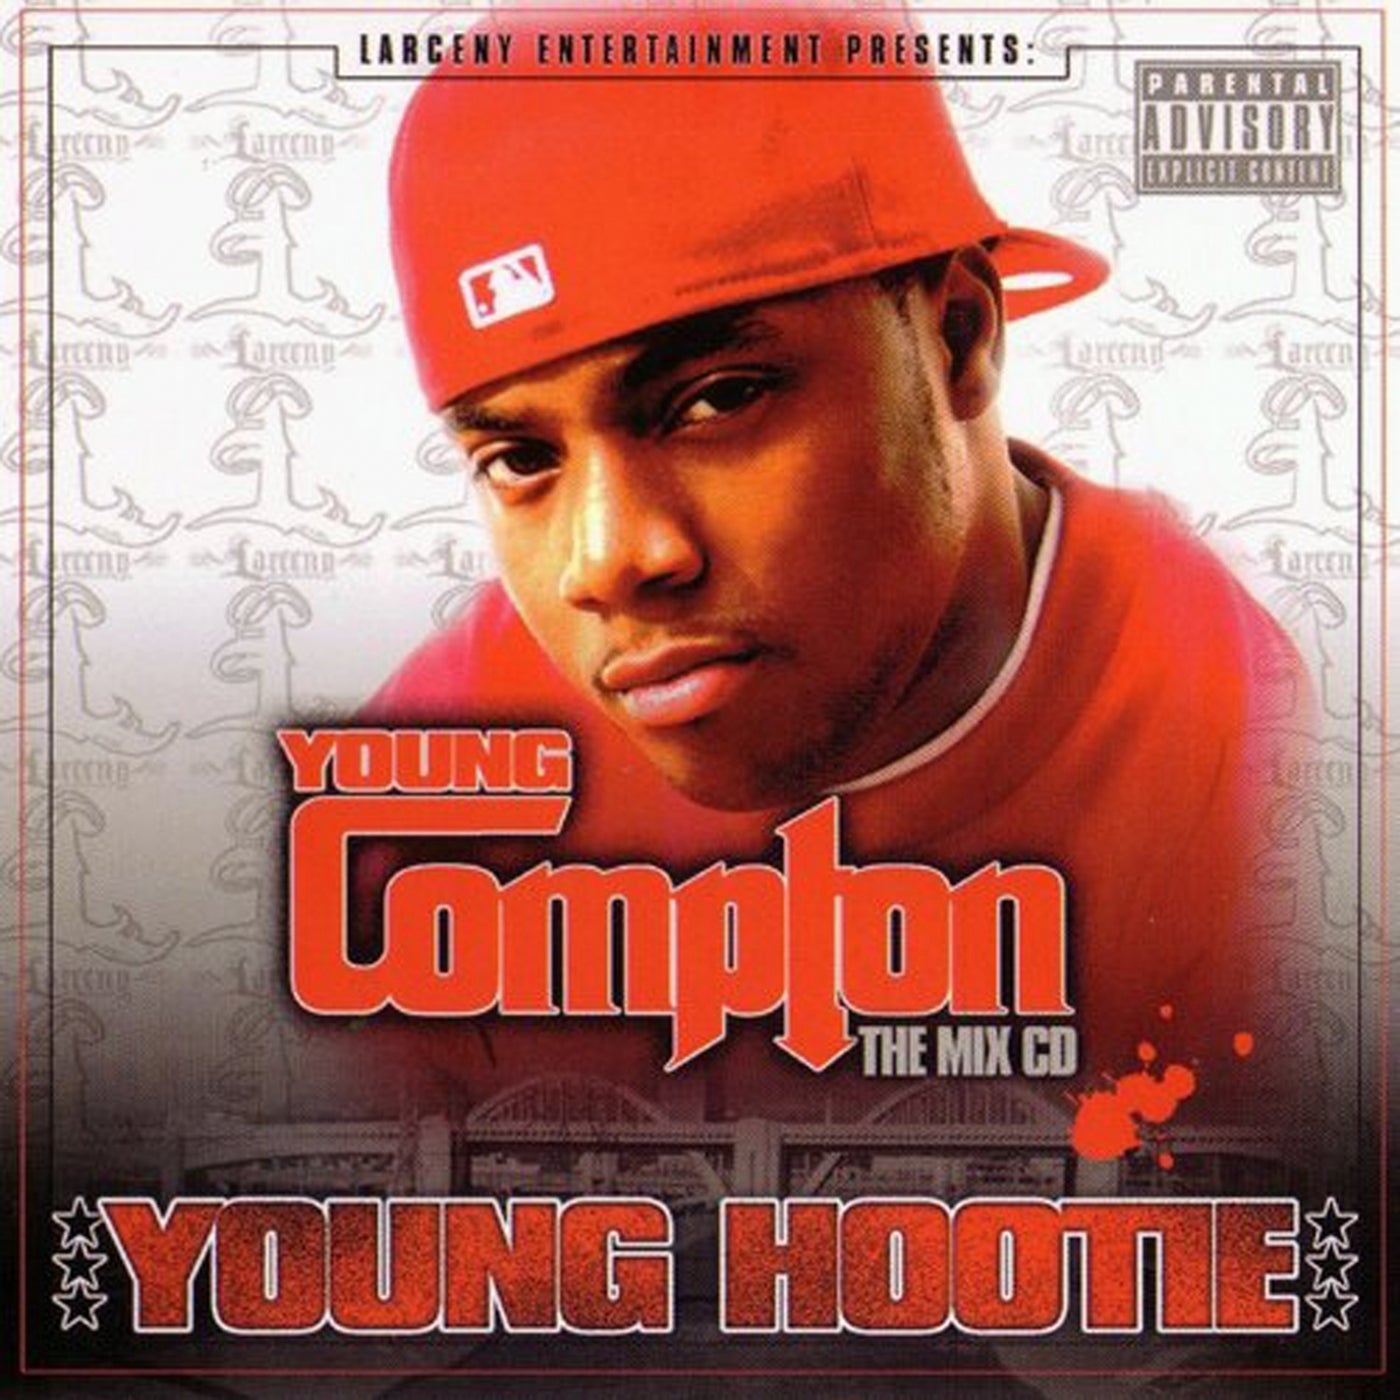 Young Compton by YG Hootie on Beatsource